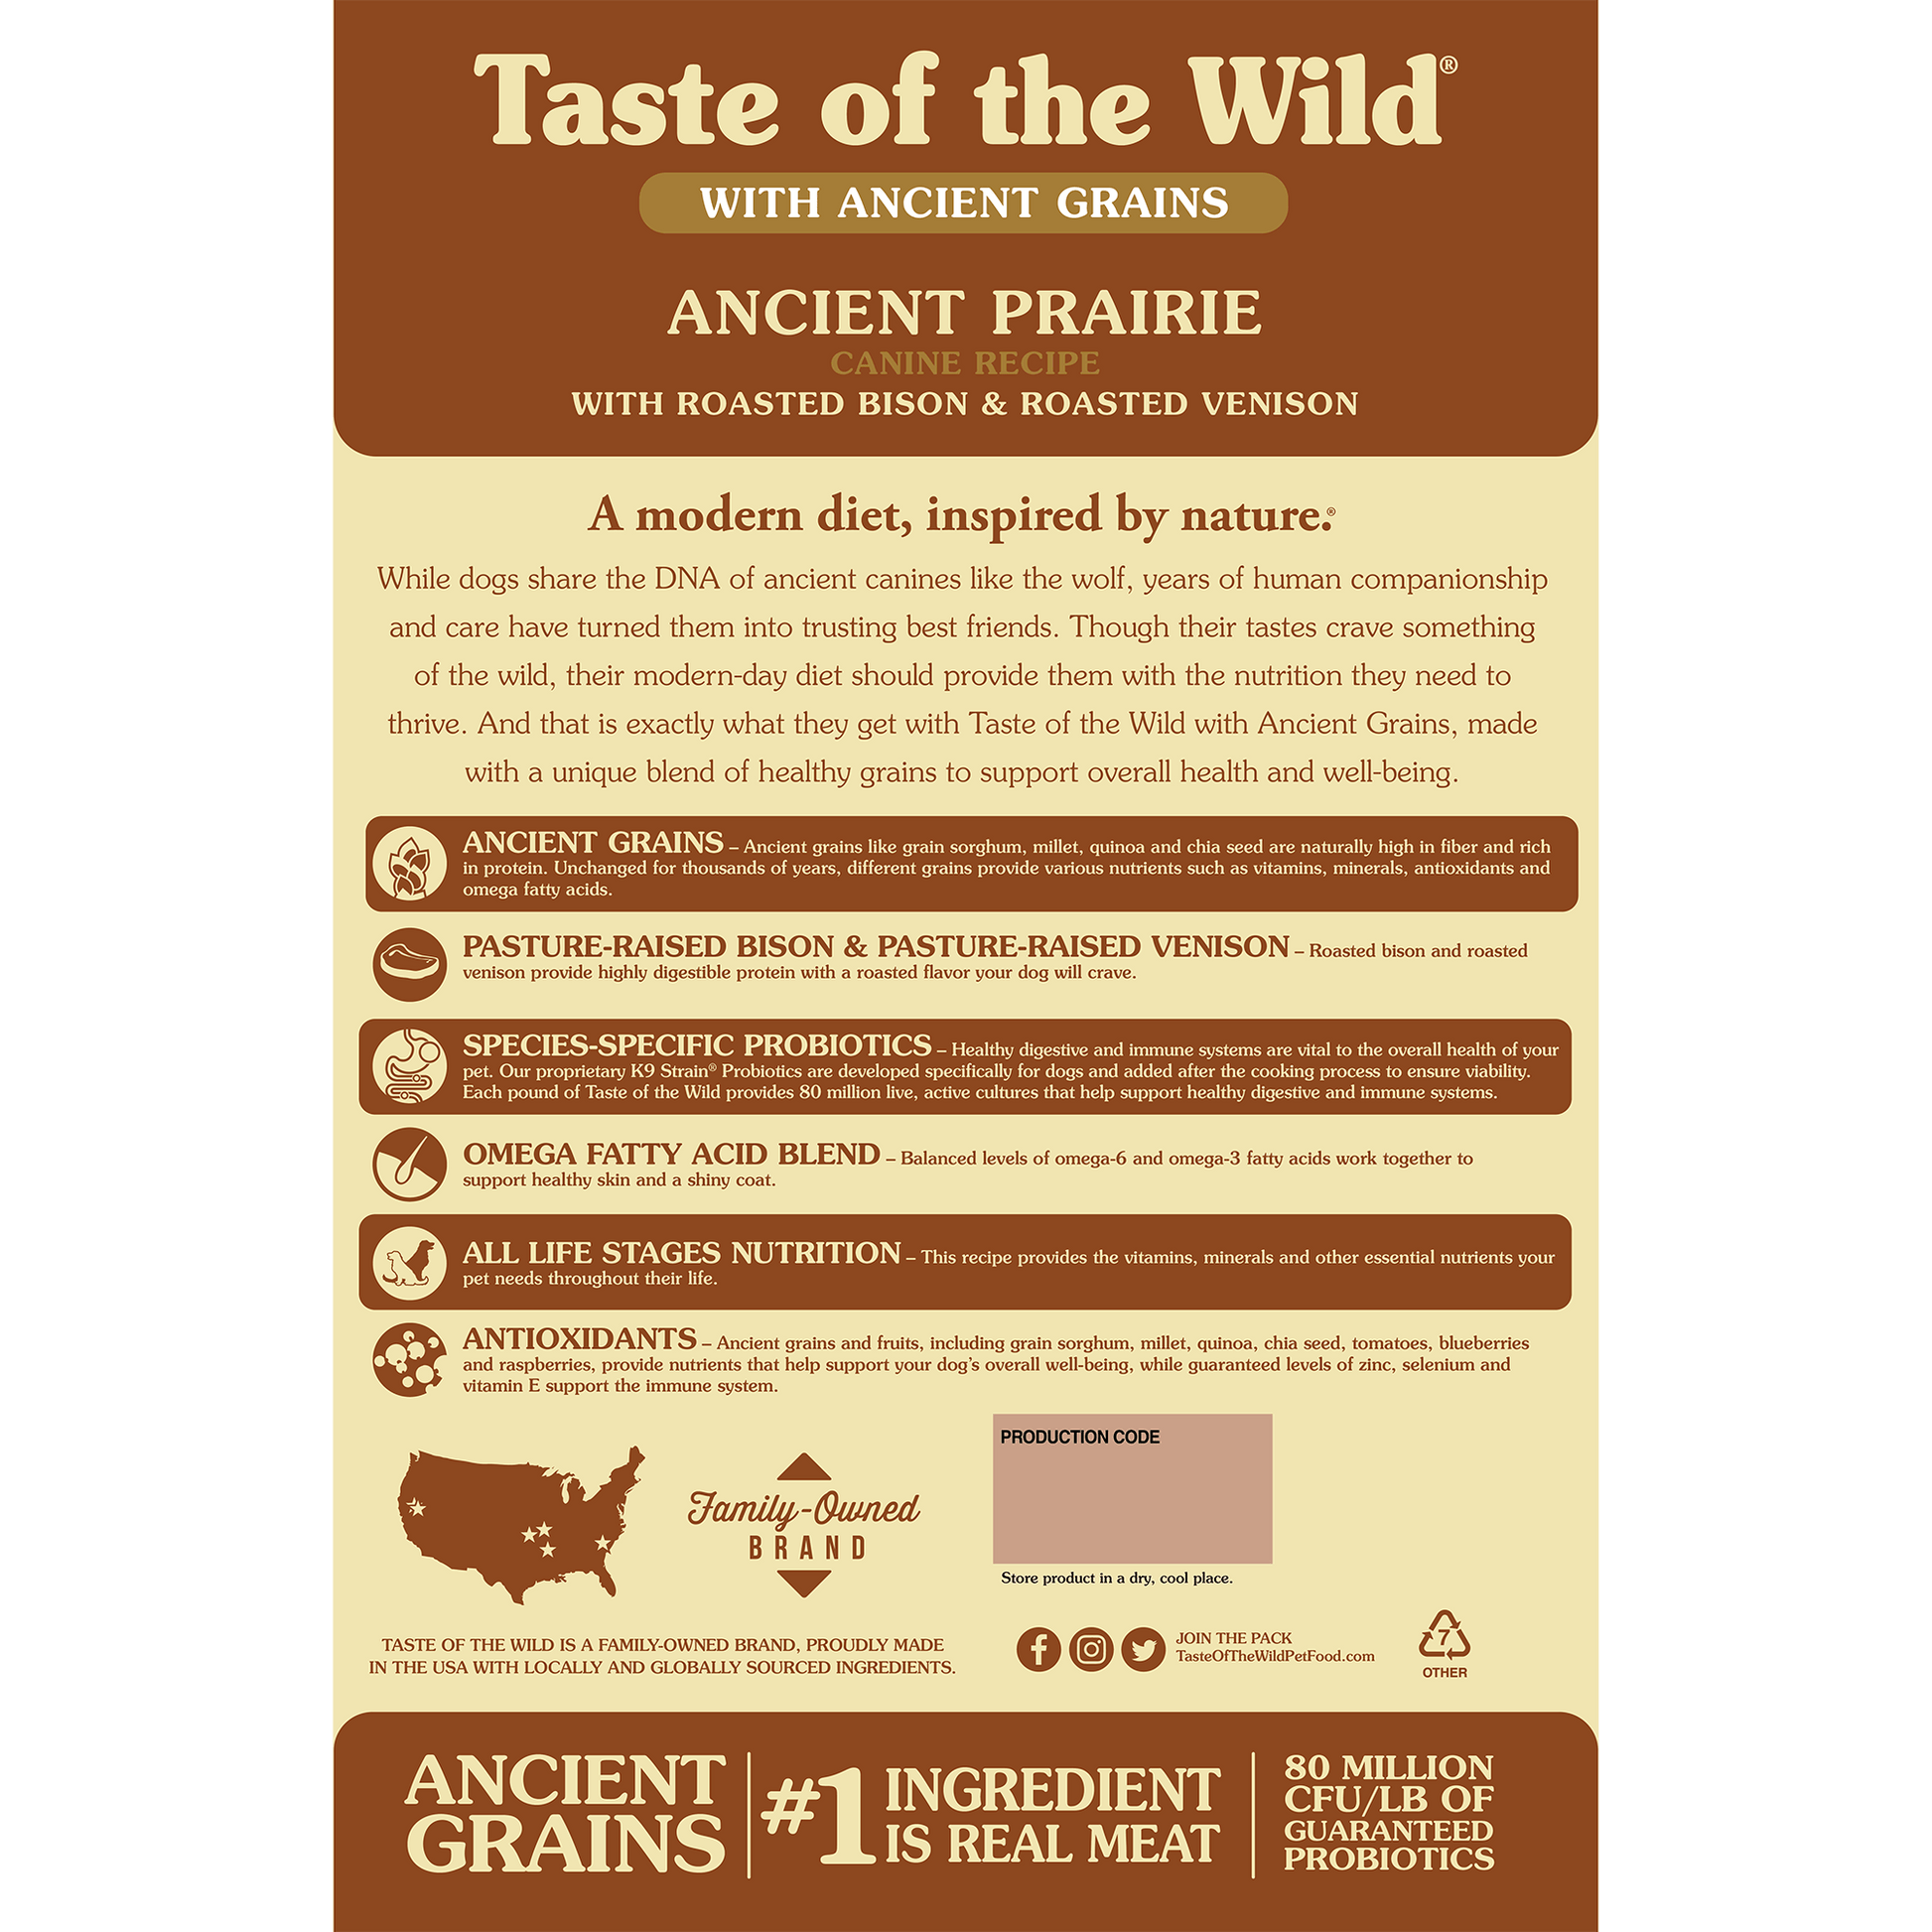 Taste of the Wild Ancient Prairie Canine Recipe for Dogs